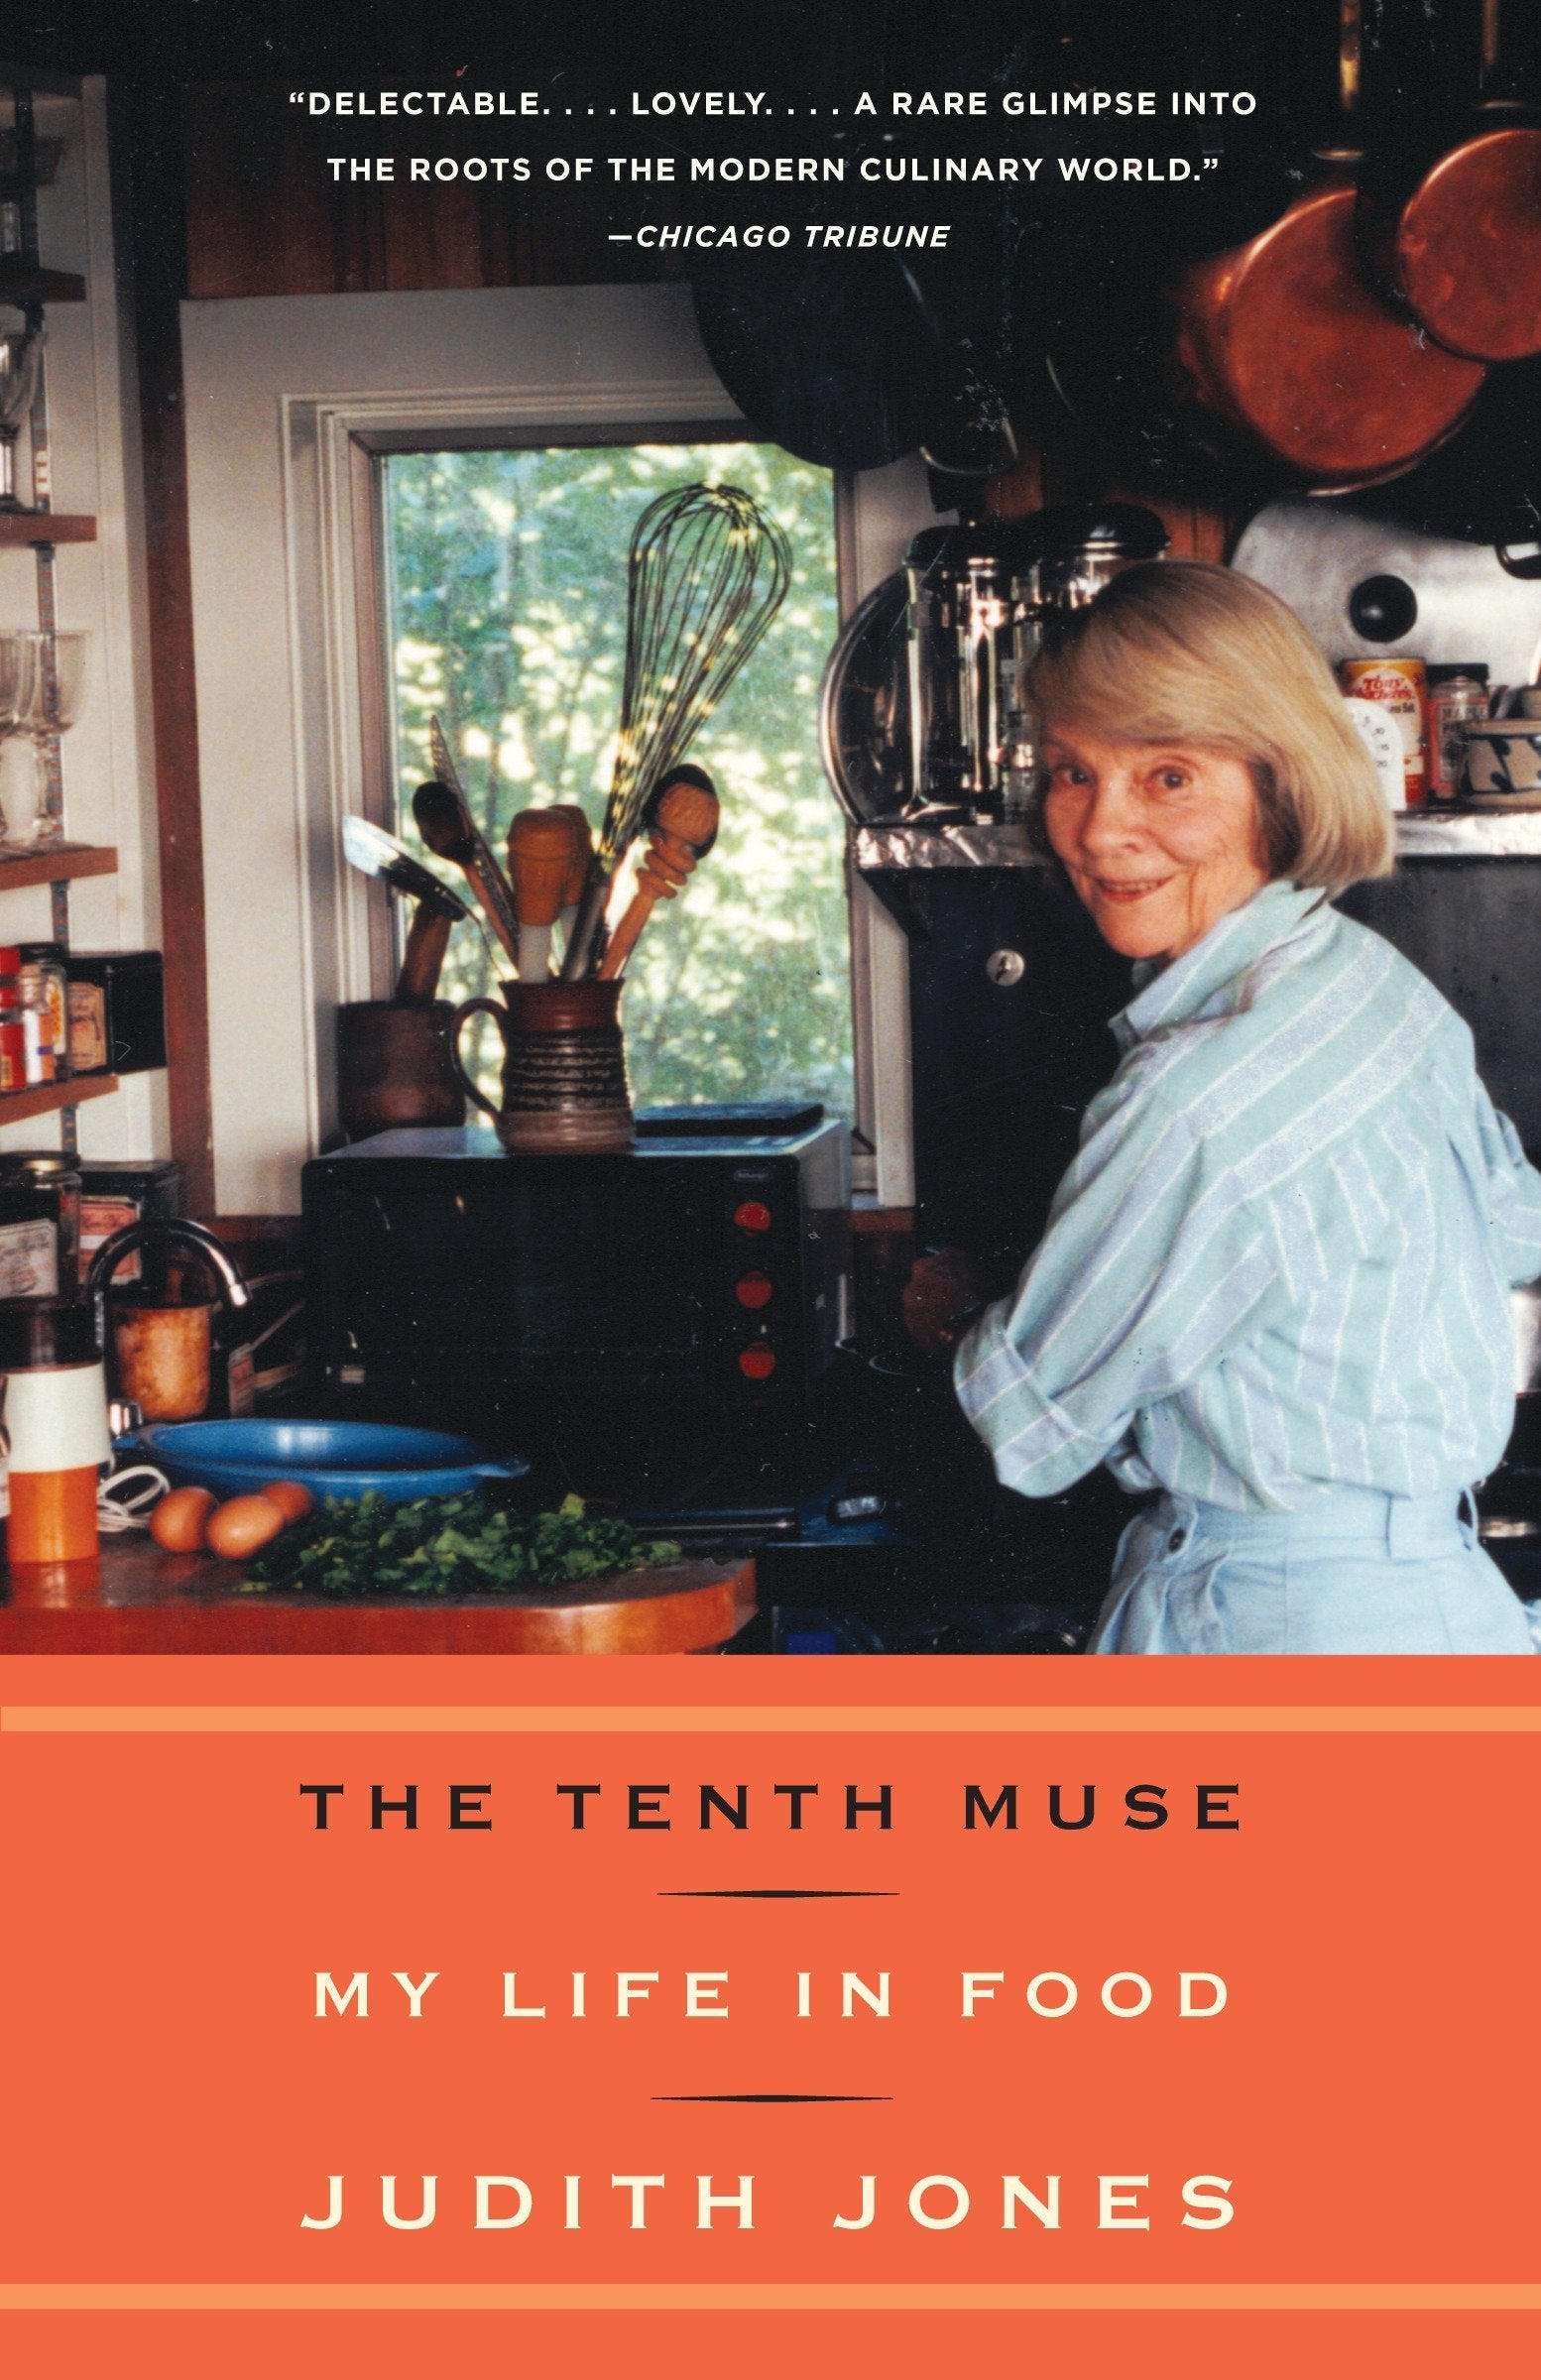 The Tenth Muse: My Life in Food (Judith Jones)